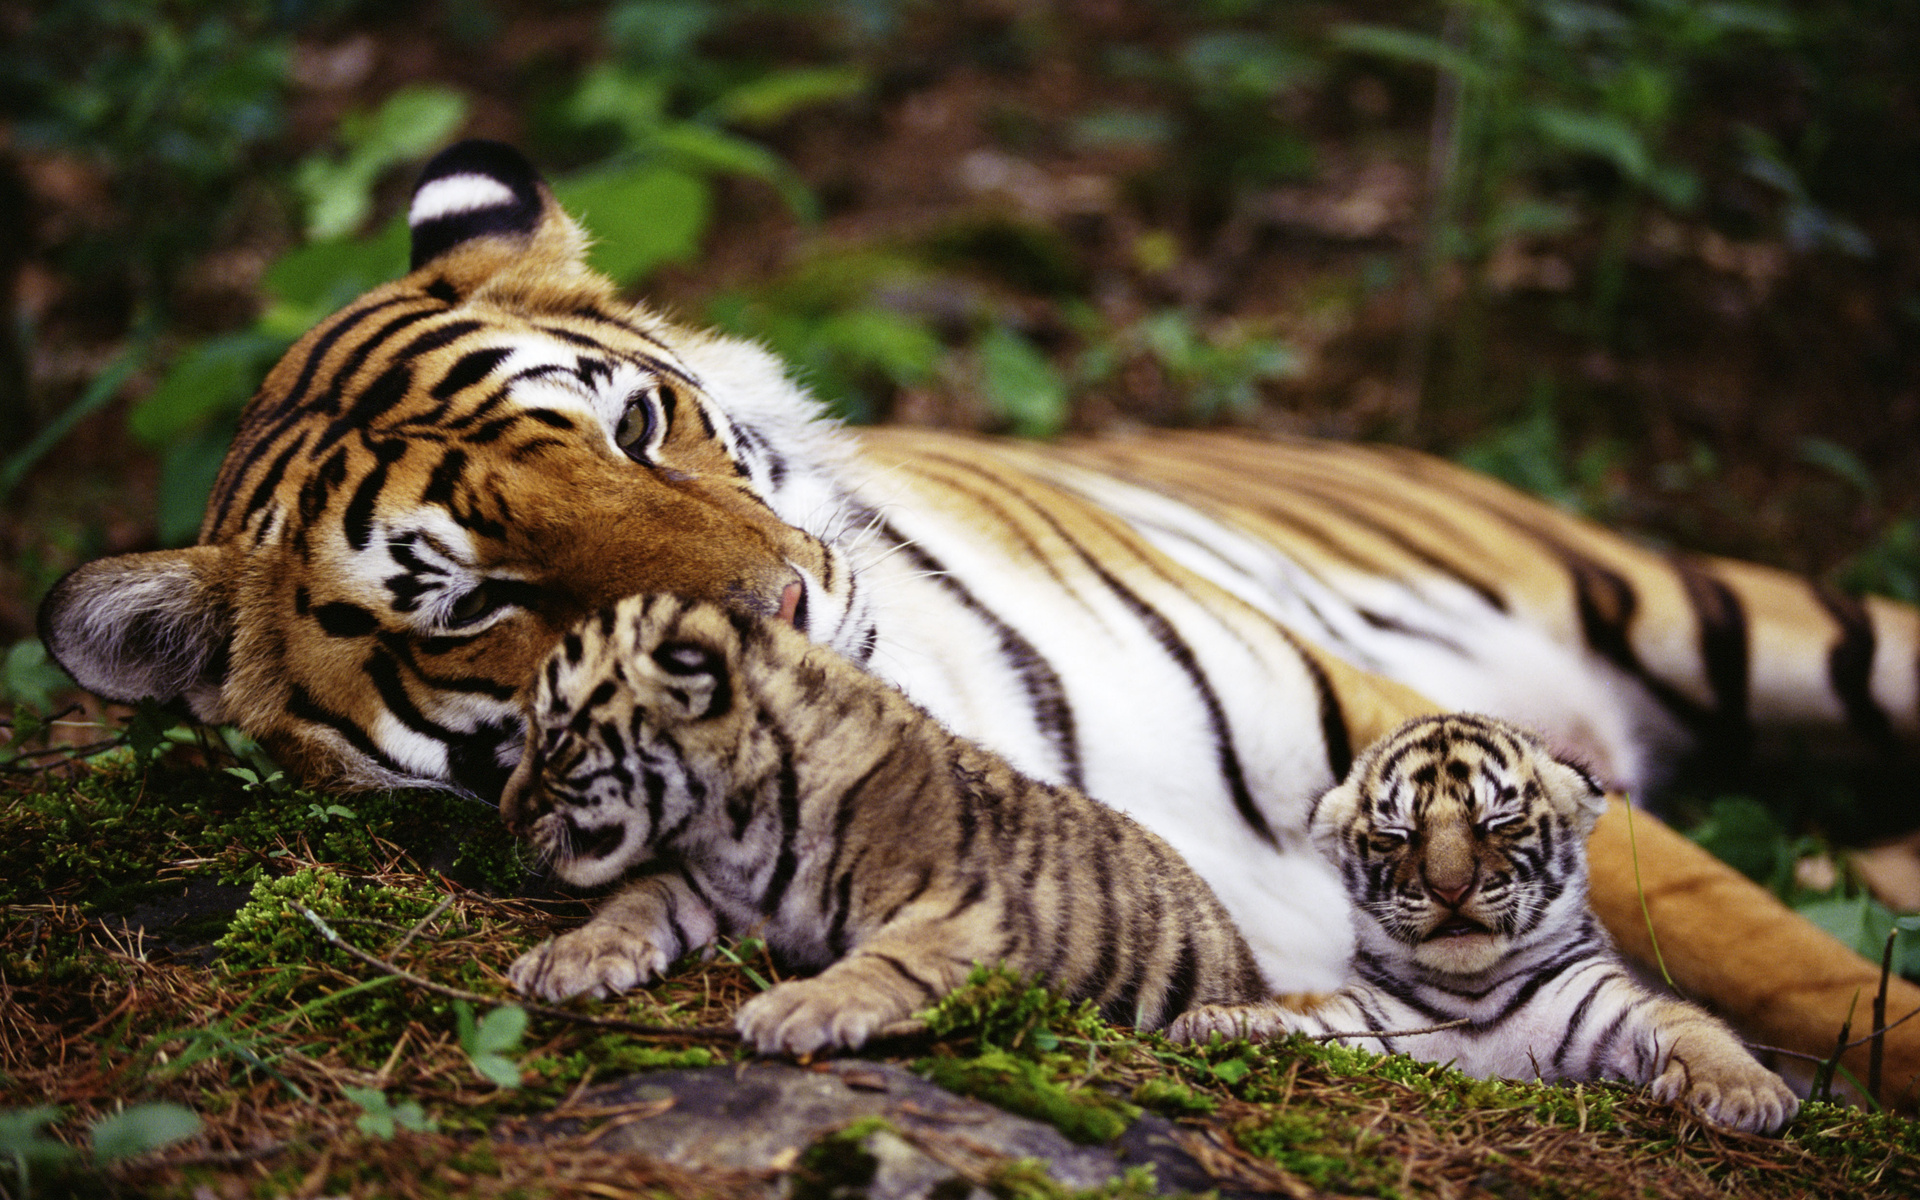 tigers, Animals, Cats, Babies, Mother, Mom, Mood, Emotion, Love, Children, Stripes, Patterns, Color, Contrast, Trees, Forests, Zoo, Wildlife, Predator, Cute, Plants, Vegetation Wallpaper